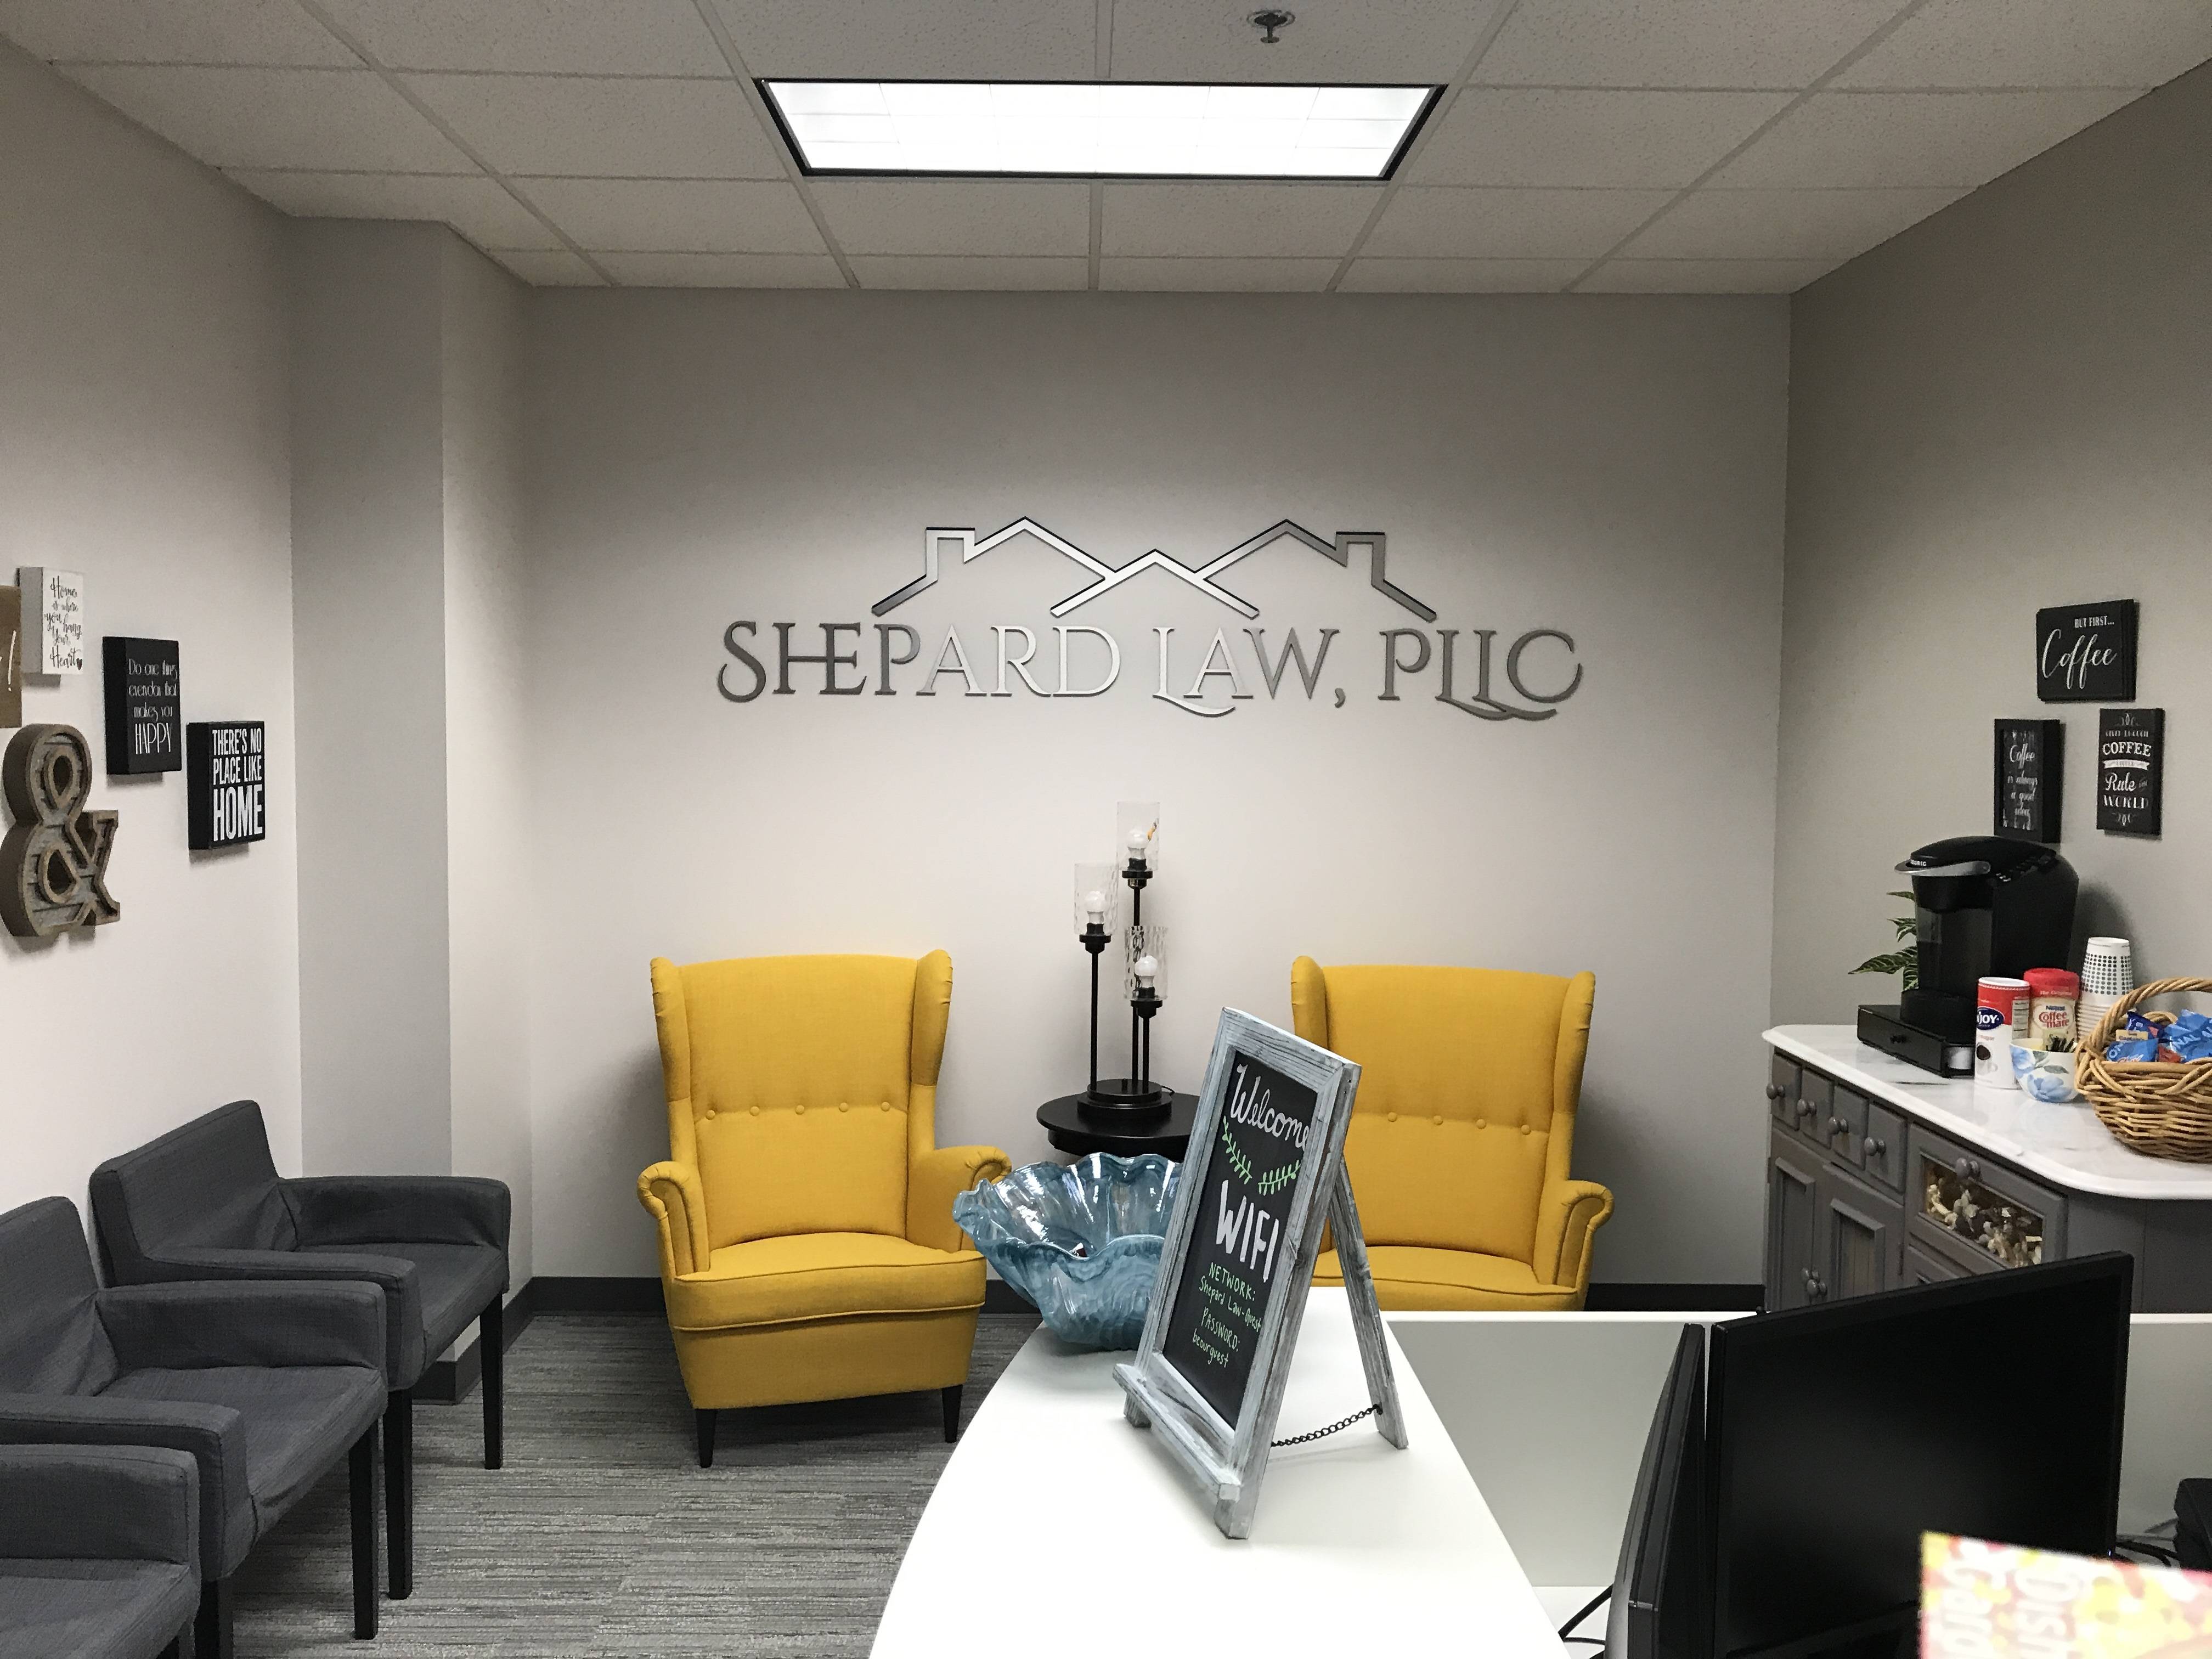 Lobby Wall Logo - Do you need an Office Lobby Sign? There are so many options!